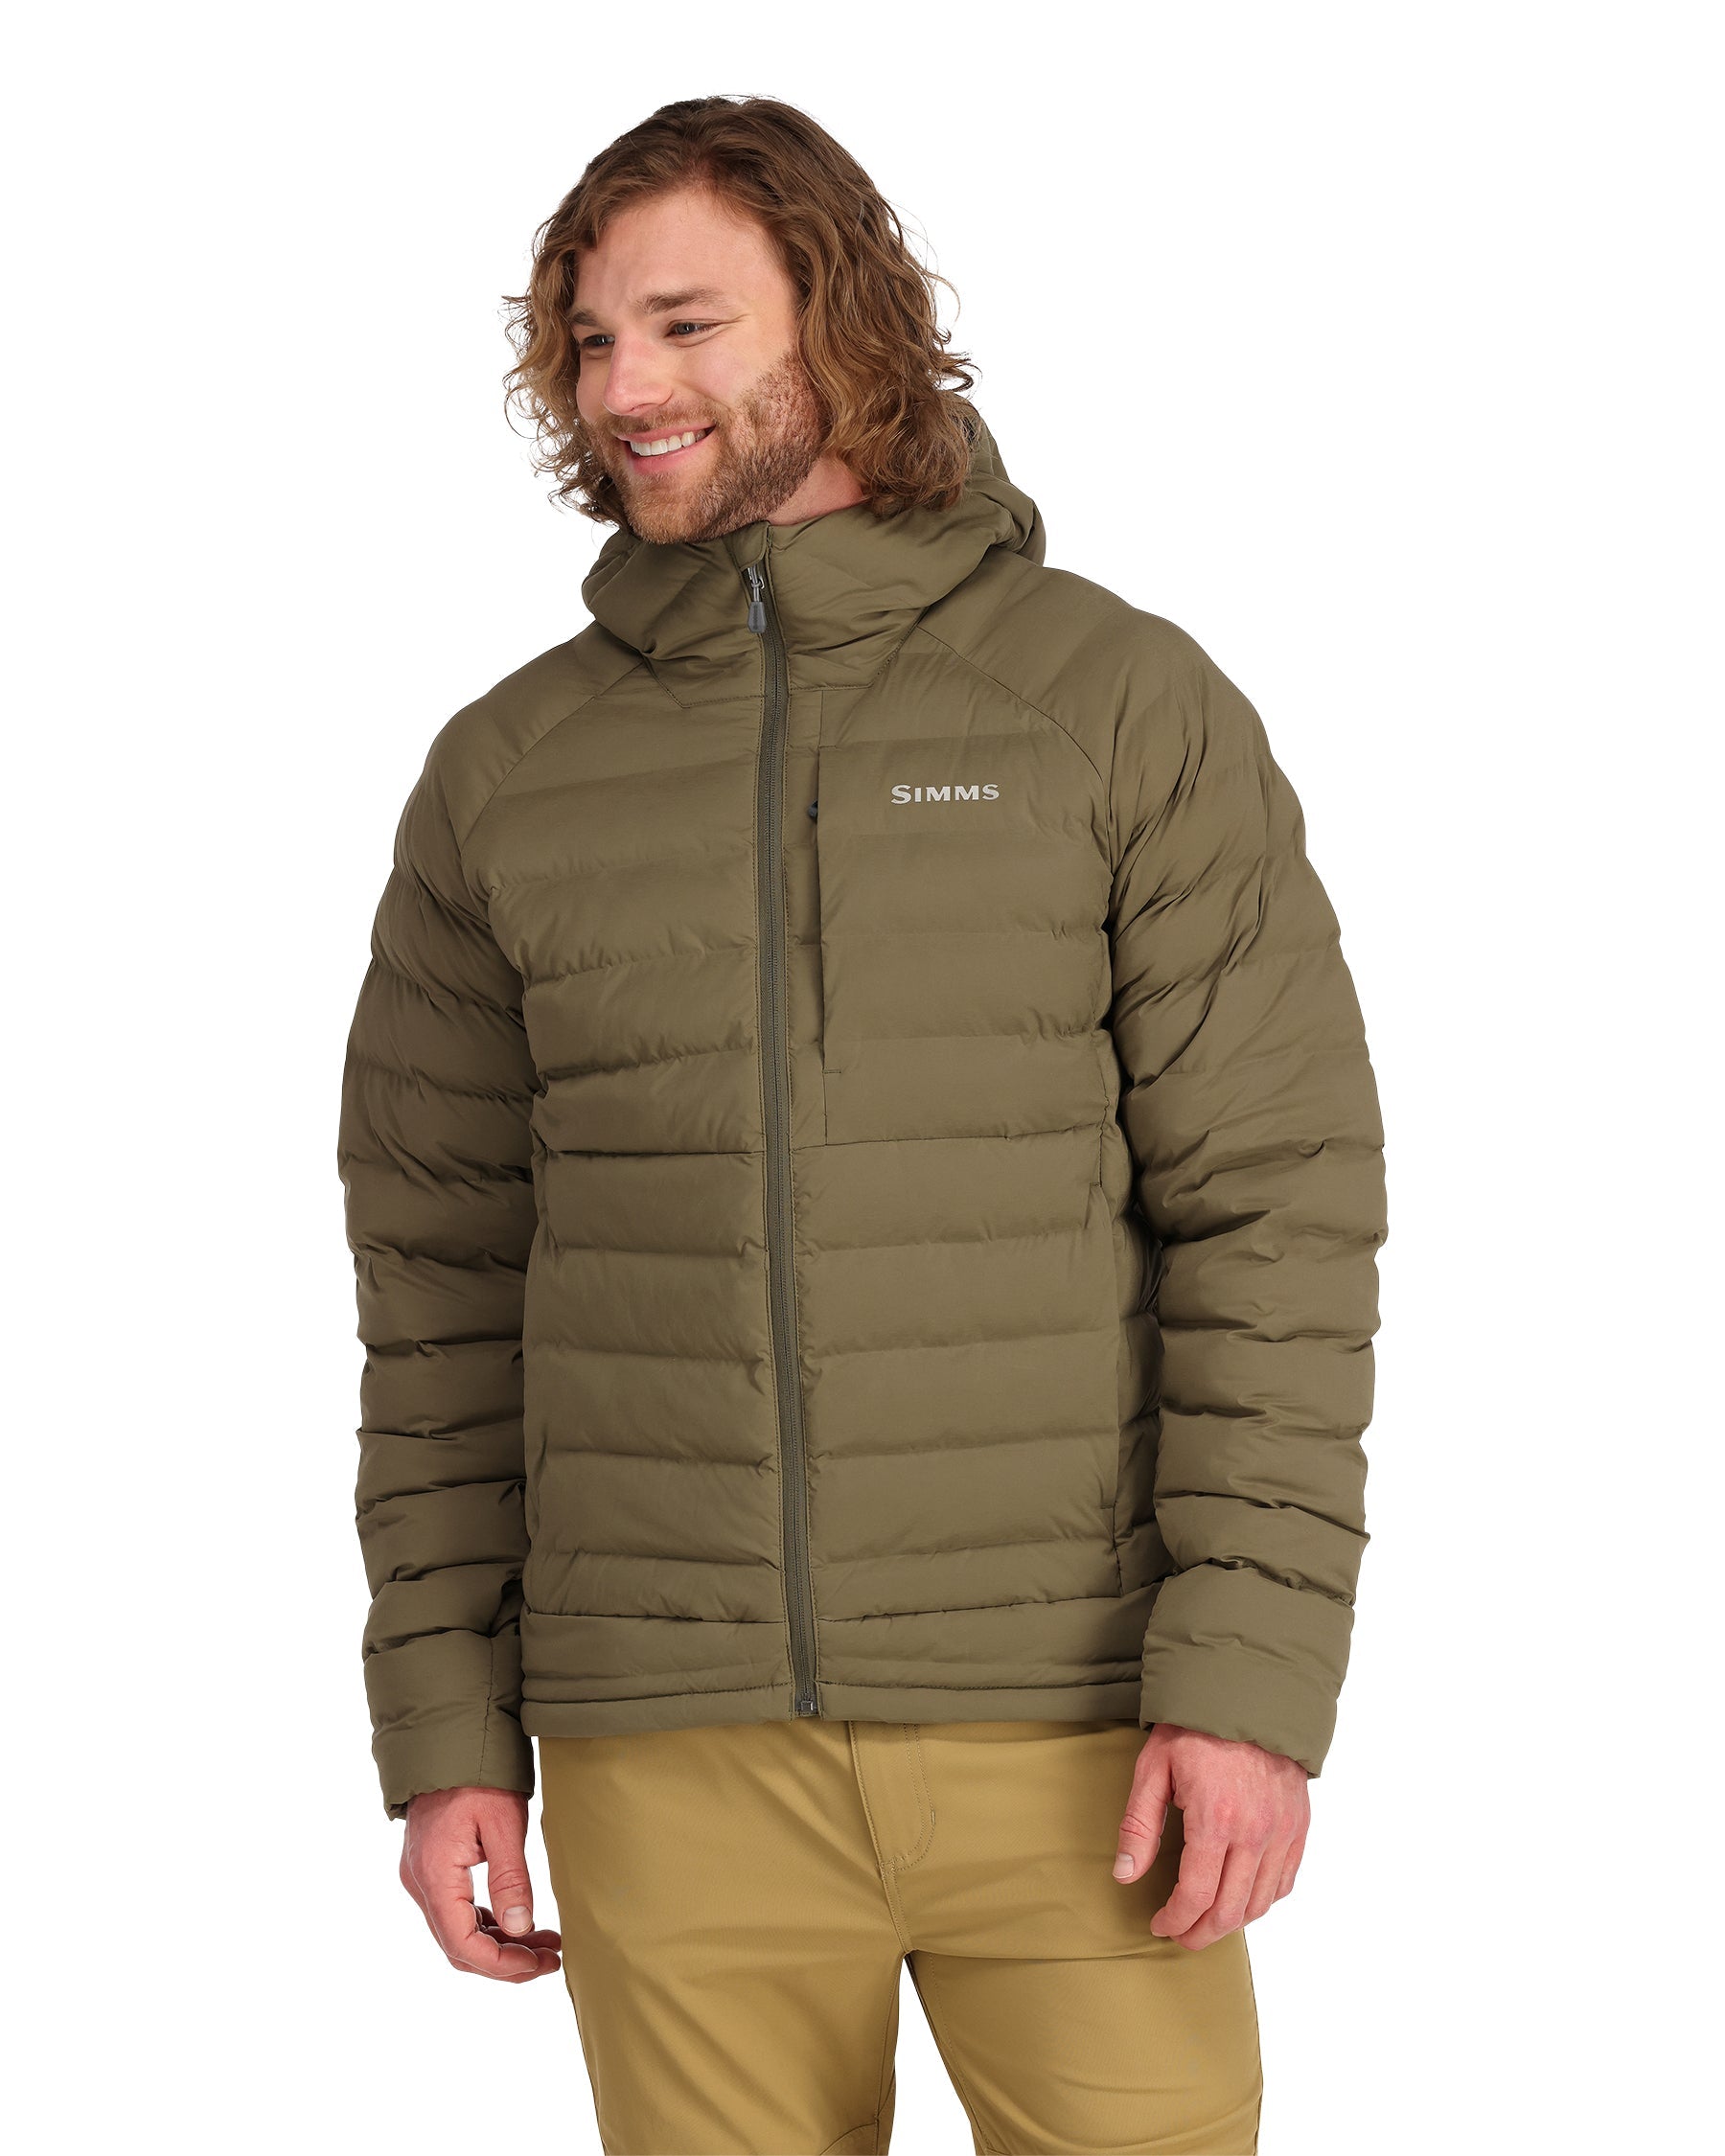 M's ExStream Insulated Jacket | Simms Fishing Products